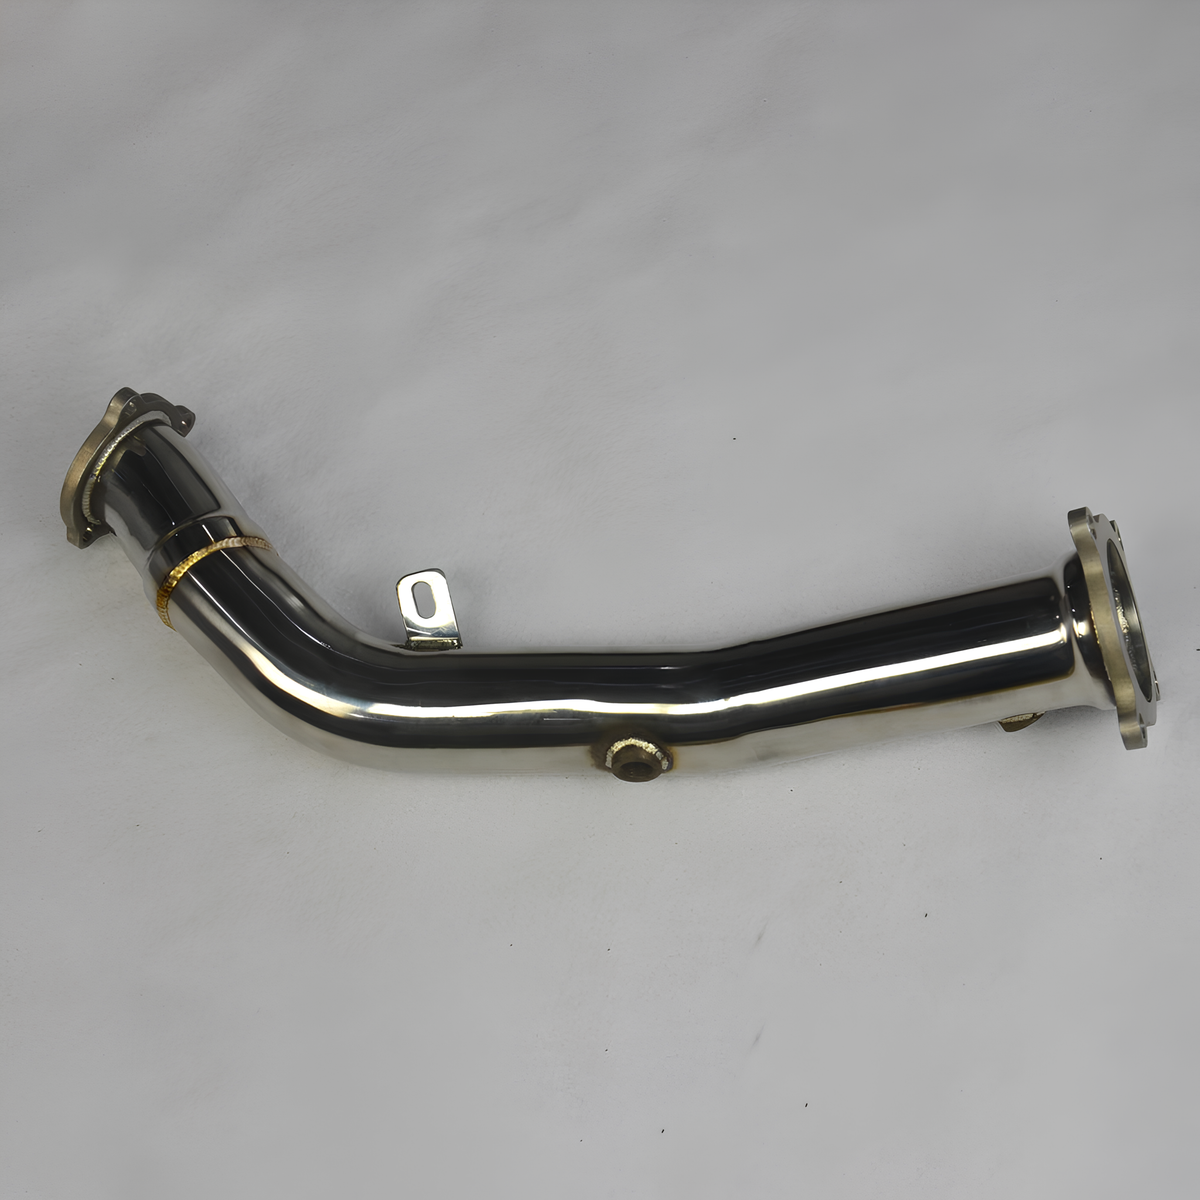 Rstype catless Downpipe For Audi B7 A4/A5 Q5 Quattro 2.0T Turbo